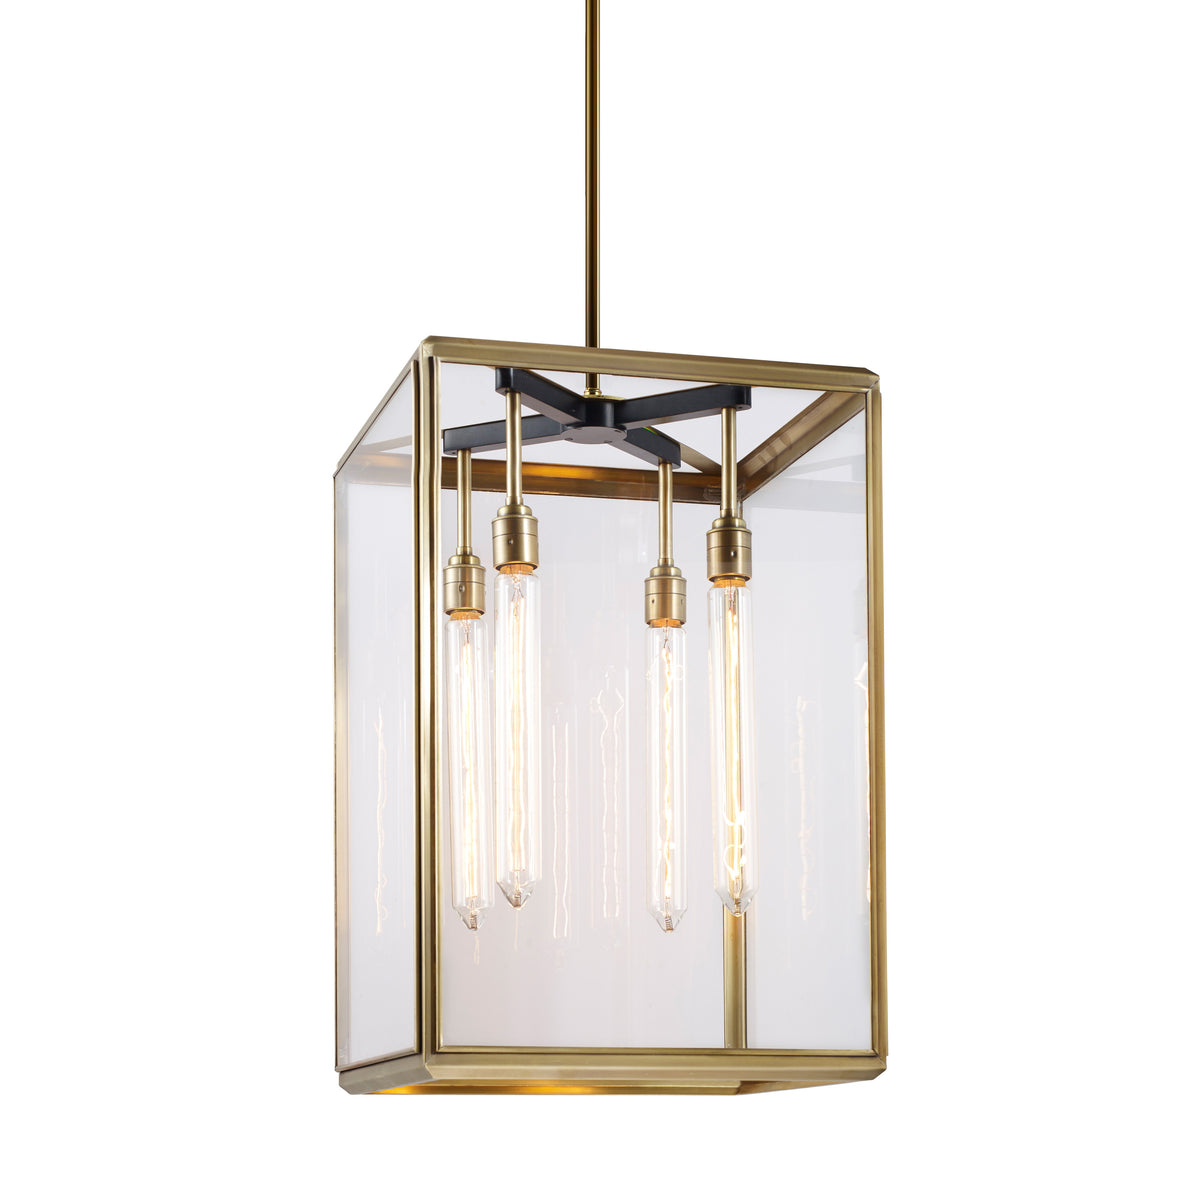 Hazel Large Lantern Pendant Light with drop rod in brass with clear glass